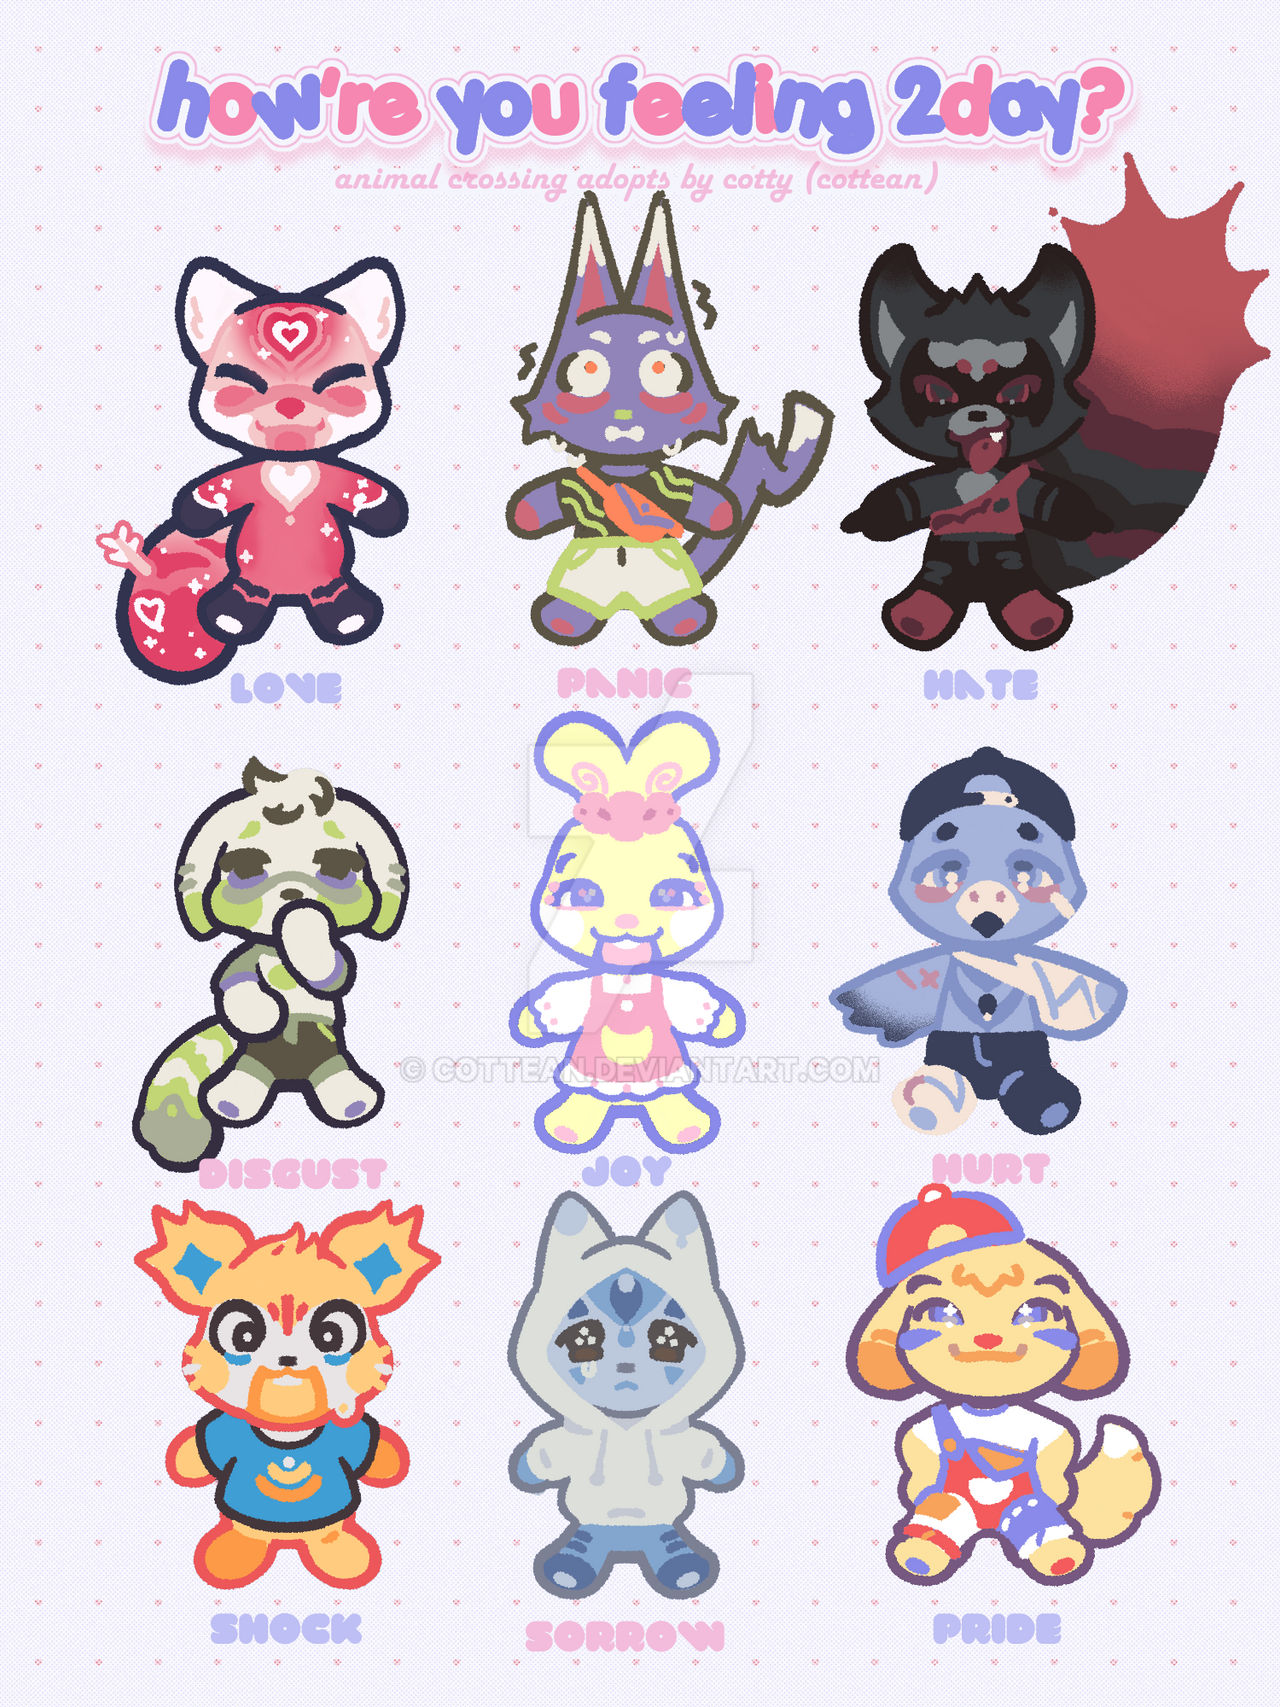 Animal Crossing Personalities Gacha [price cut!] by Cottean on DeviantArt